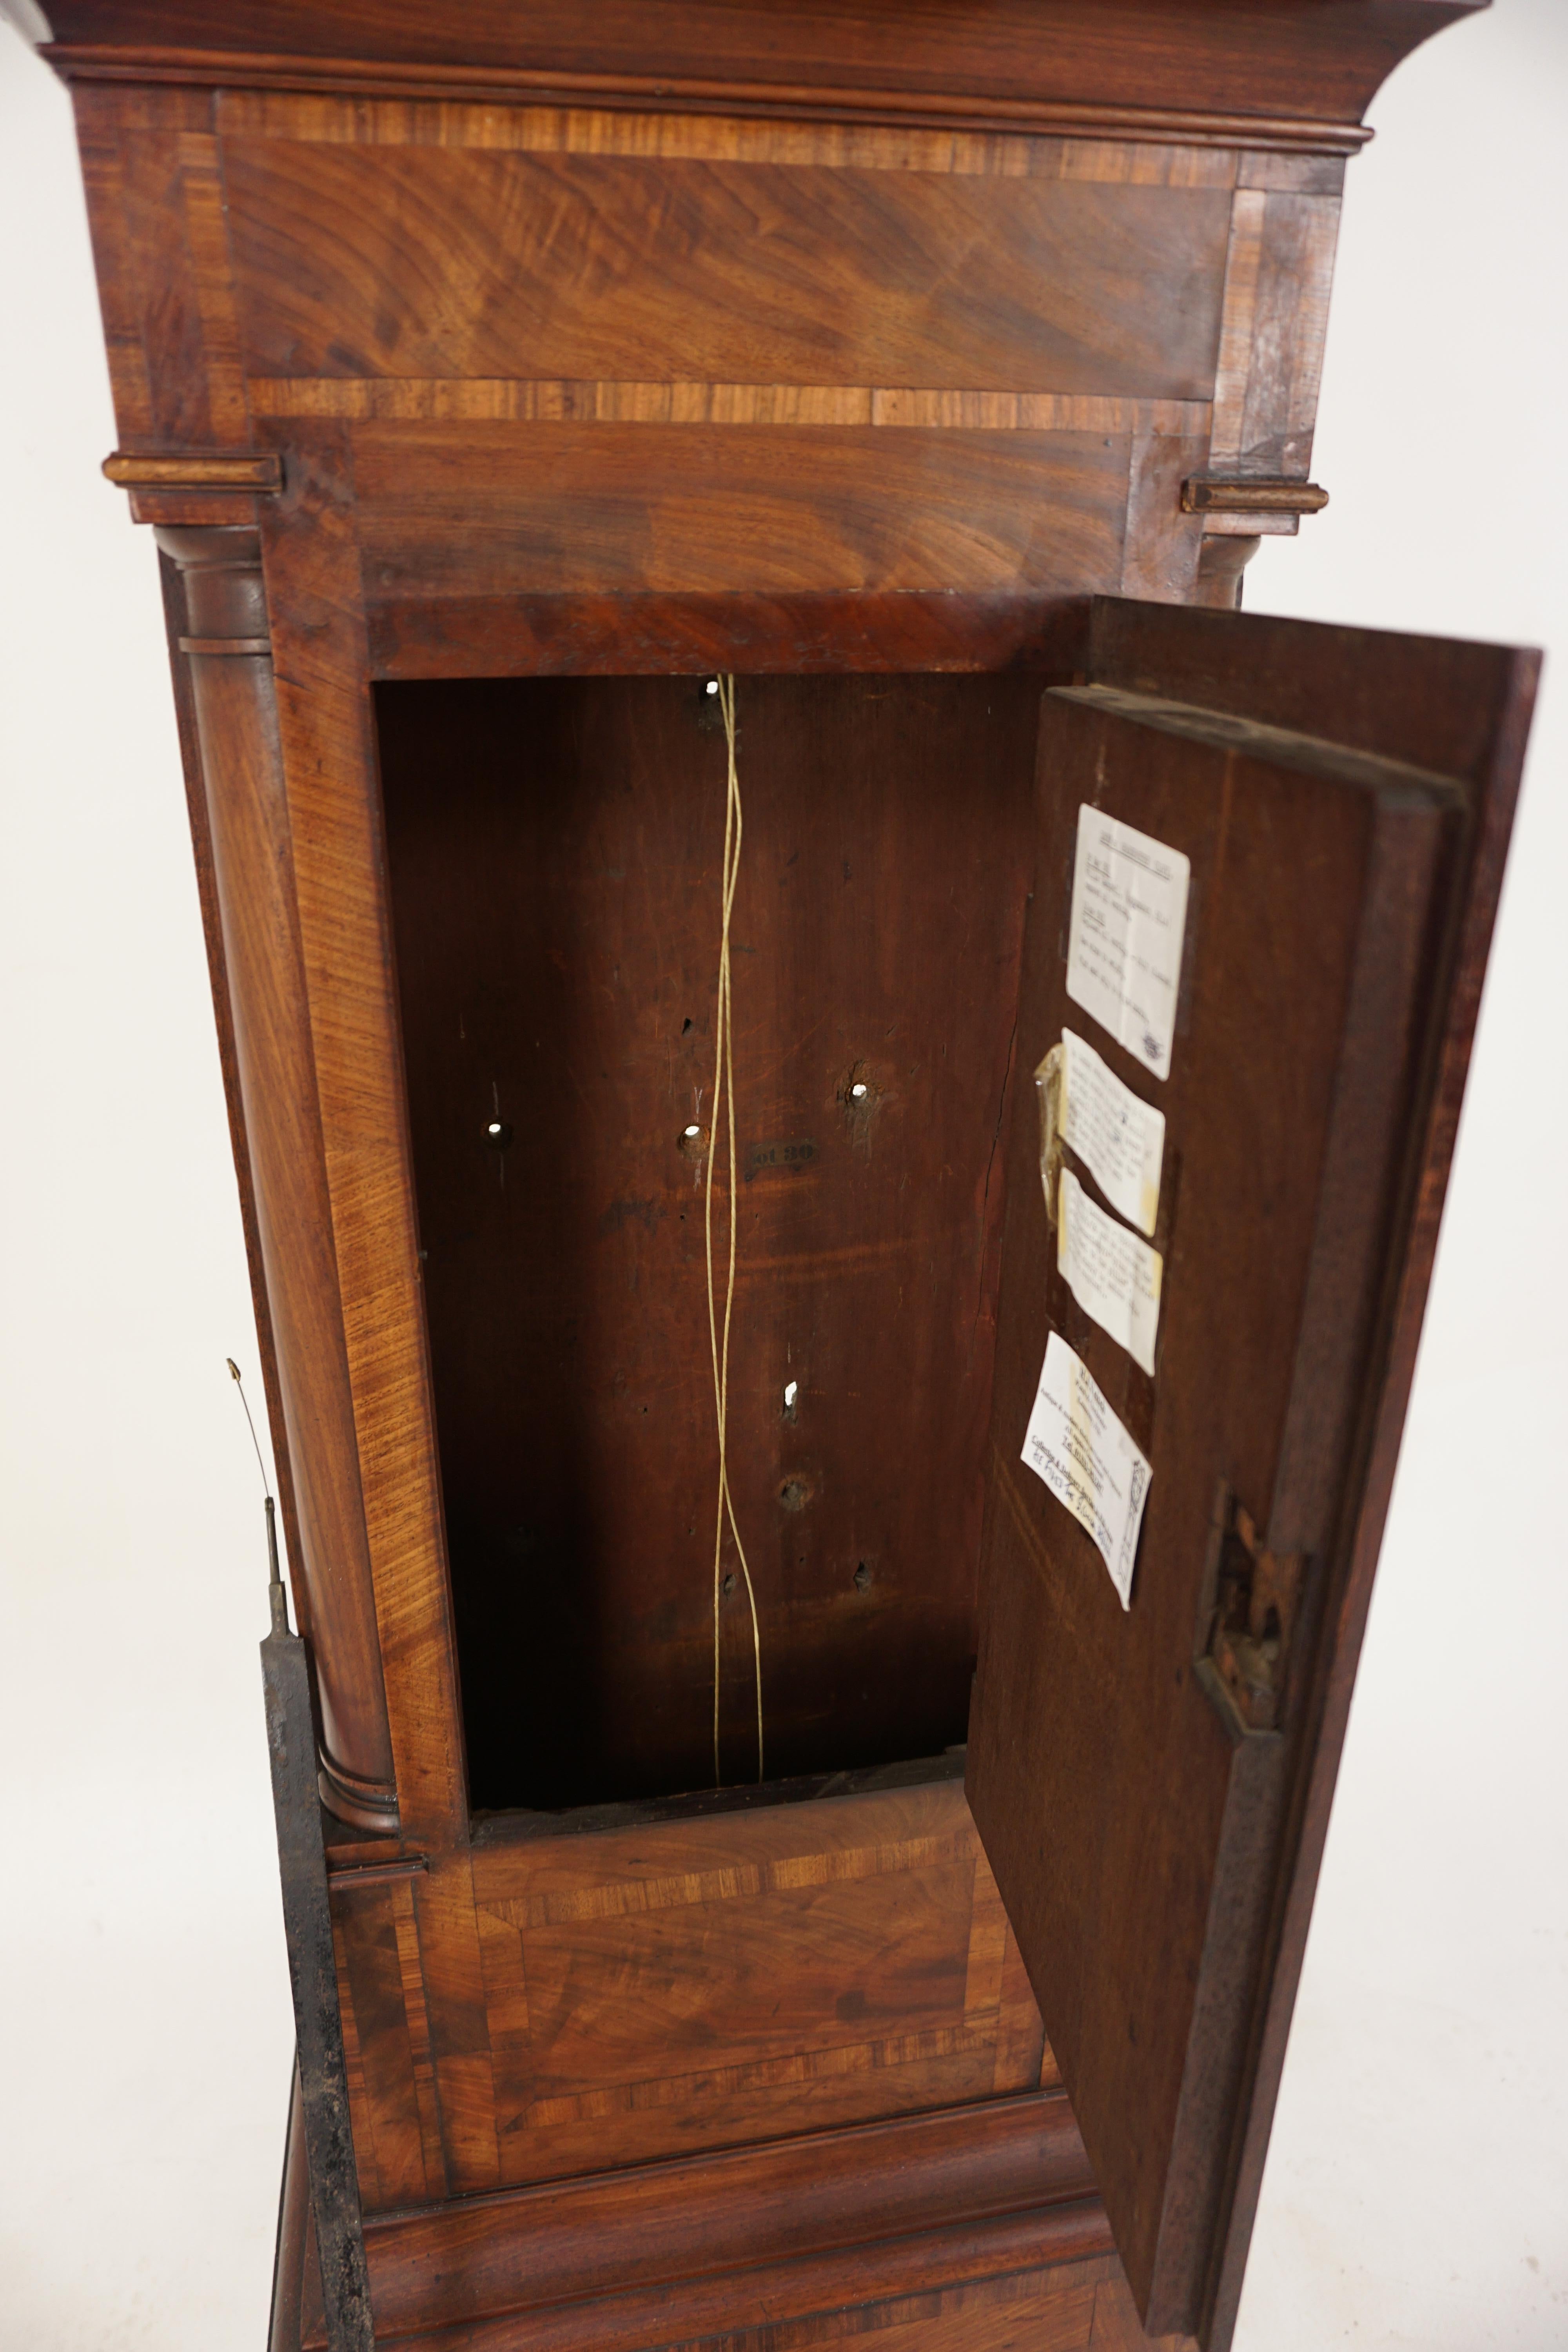 Victorian Grandfather Long Case Clock by Jolliffe of Portsea, England 1870, H061 3